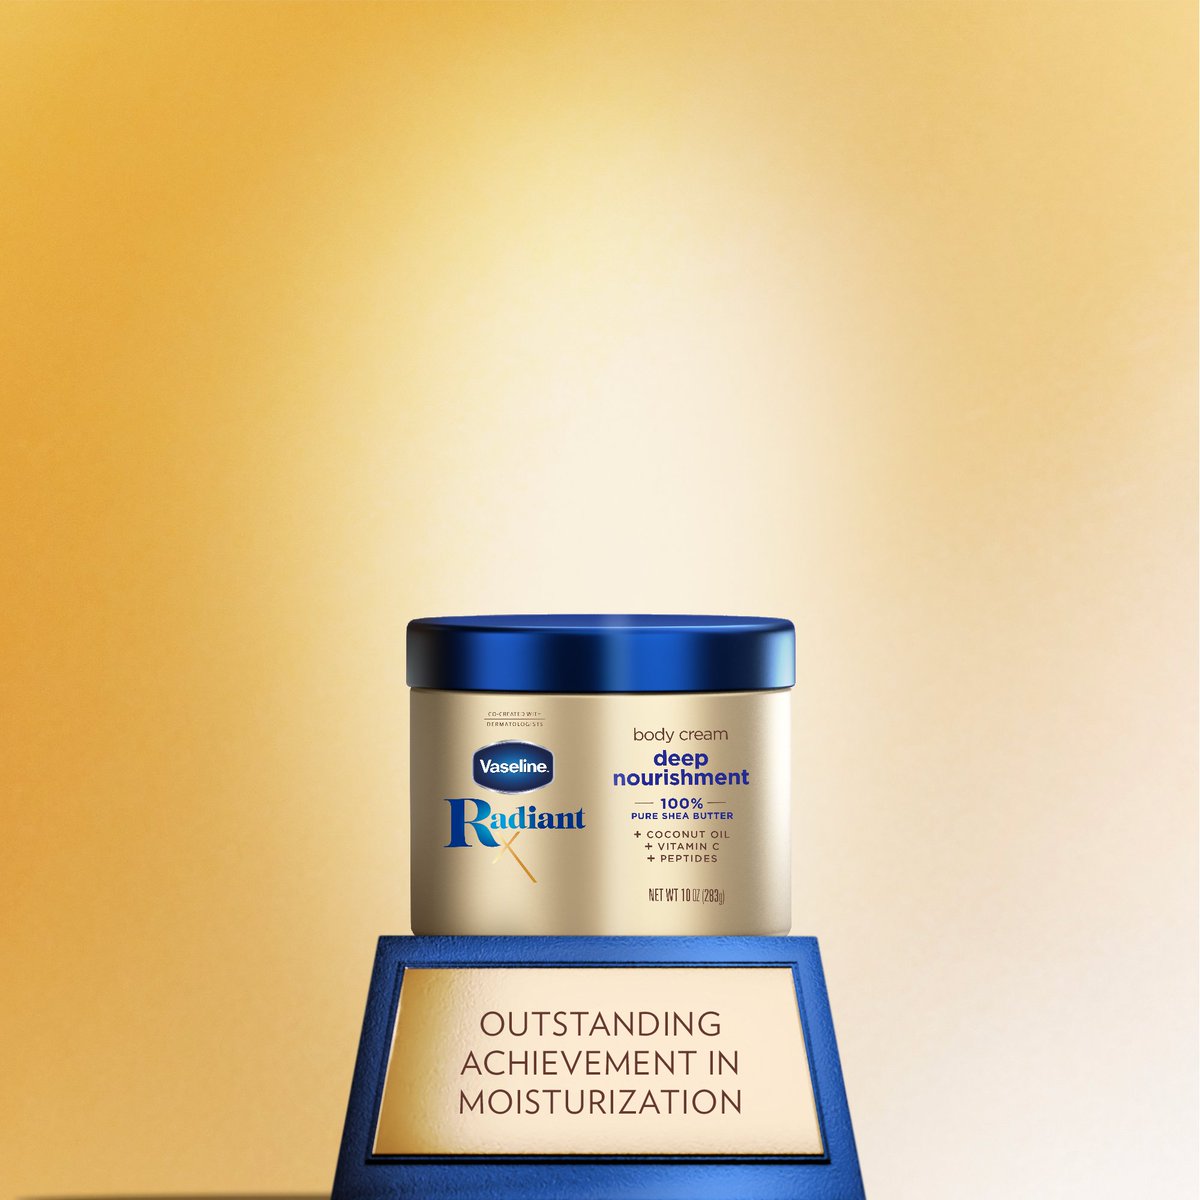 And the award for most moisturizing skincare brand goes to.... 🏆 ​ What award would you give your favorite Vaseline product?​ #Vaseline #RadiantX #AwardsSeason #BodyCareProducts